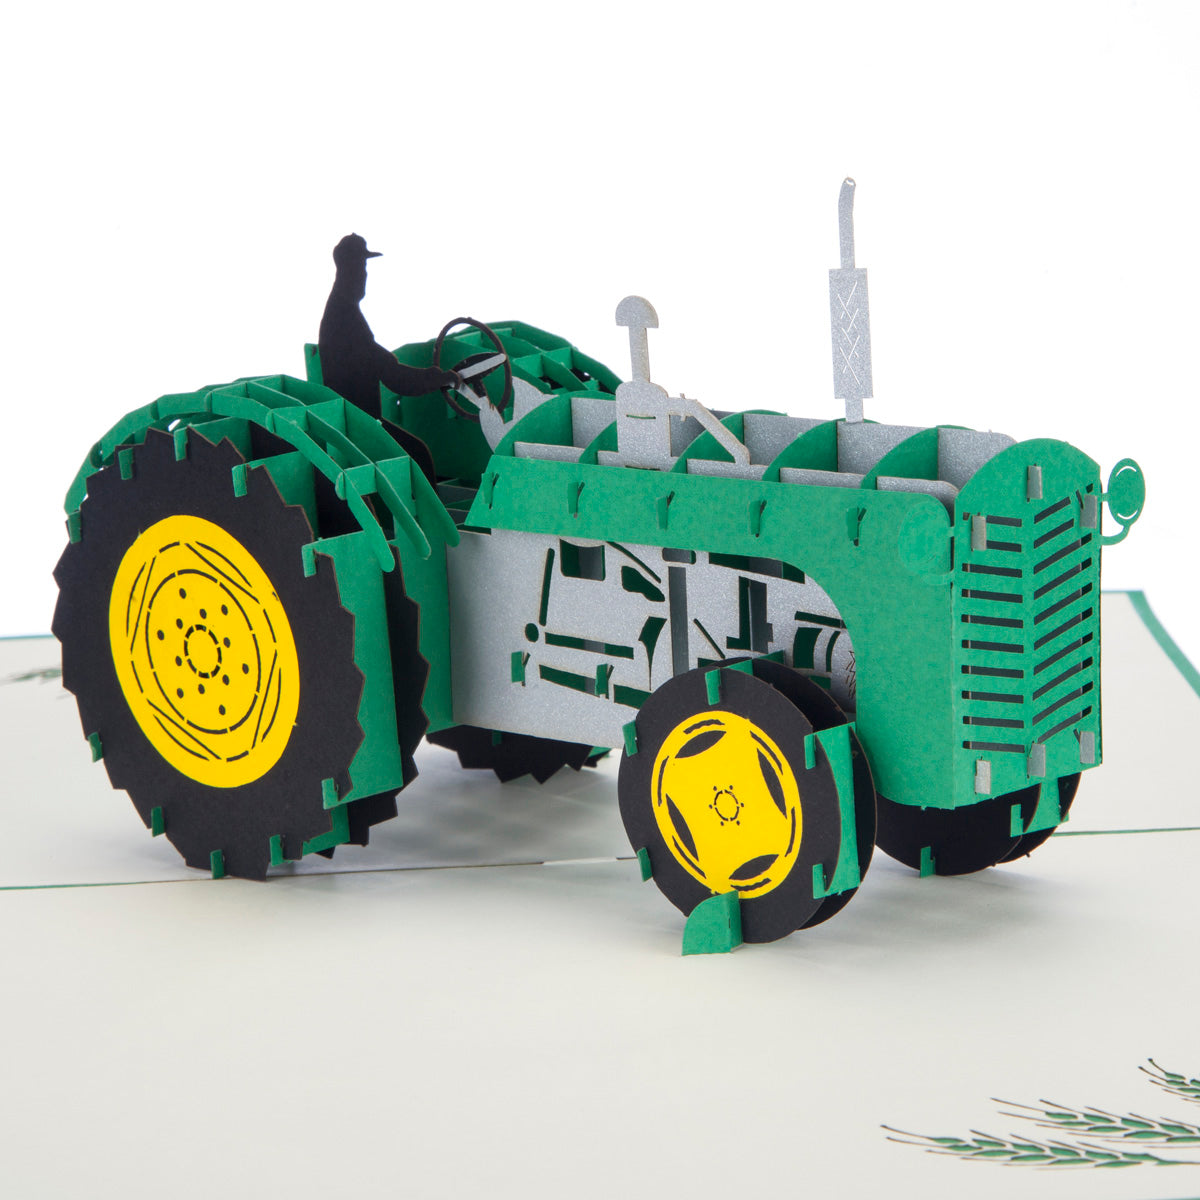 Farmers Green Tractor Pop Up Greeting Card